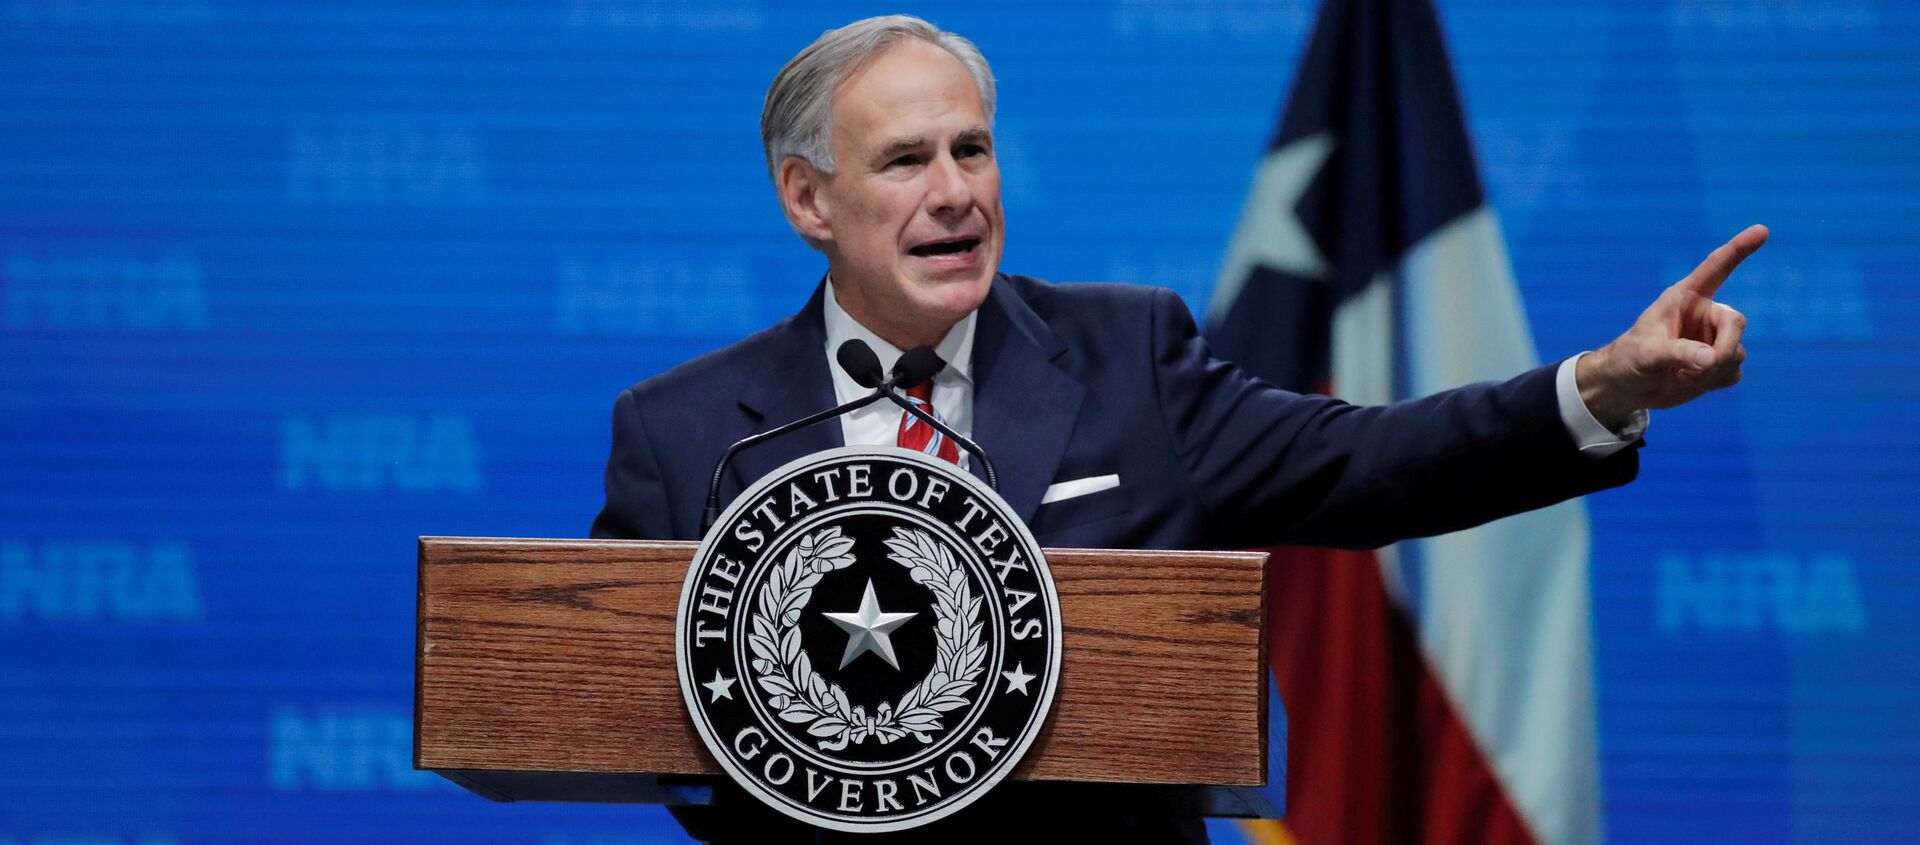 Texas Governor Greg Abbott speaks at the annual National Rifle Association (NRA) convention in Dallas, Texas, U.S., May 4, 2018 - Sputnik International, 1920, 15.06.2021